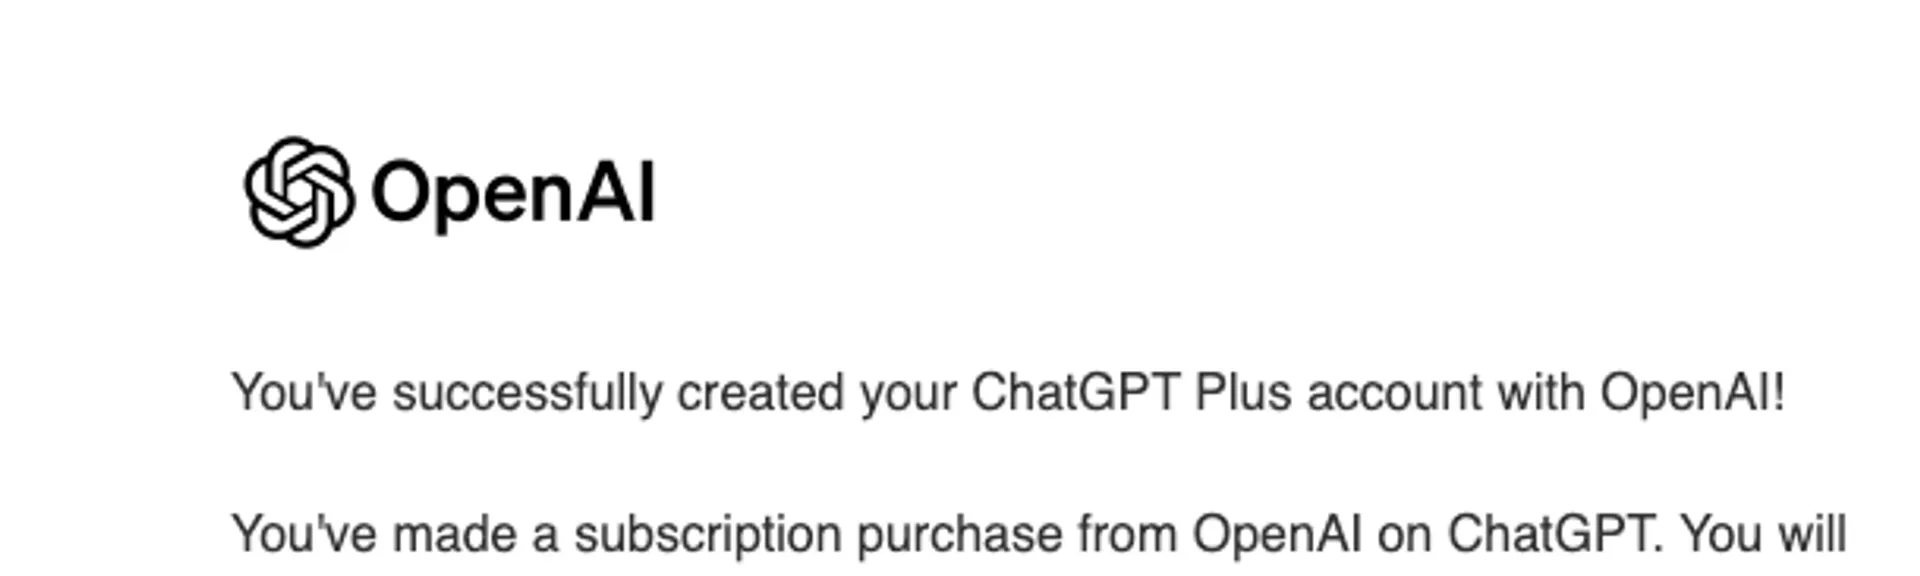 I'm trying out chatGPT Plus, please share with me any tips or information on how to best make use of it, particularly in day-to-day coding

How do you use it to make your work and research easier, please share with me